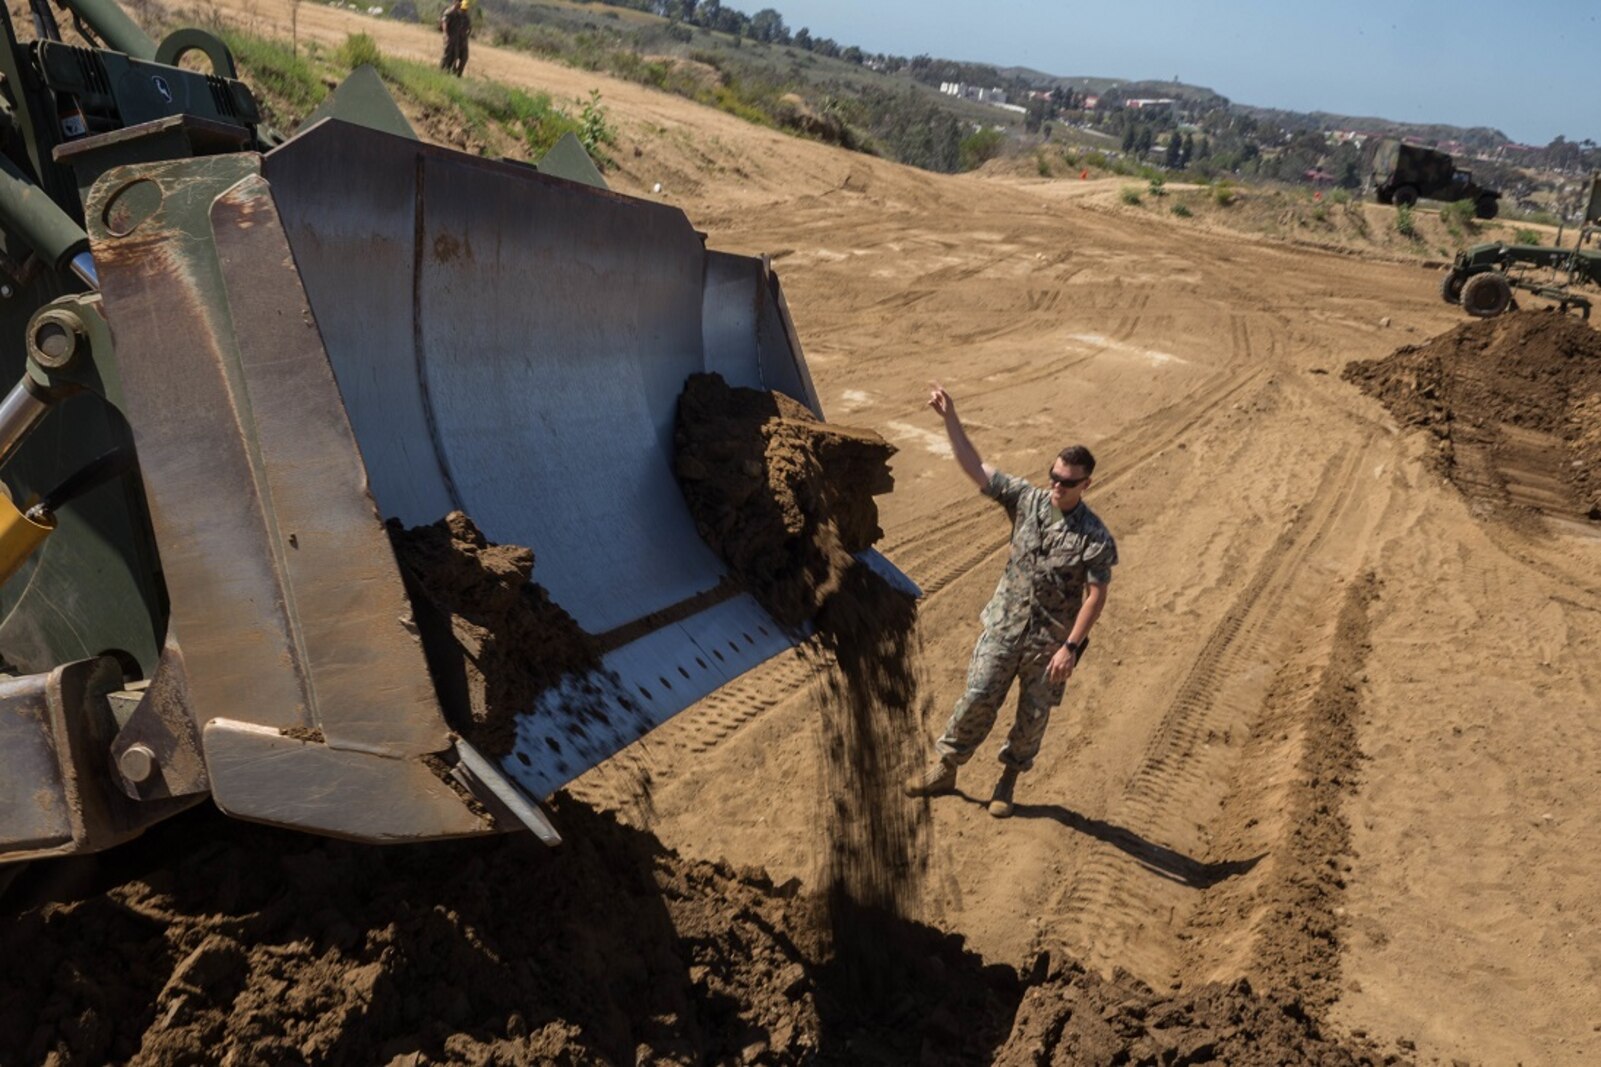 7th Engineer Support Battalion - Dig Site Exercise